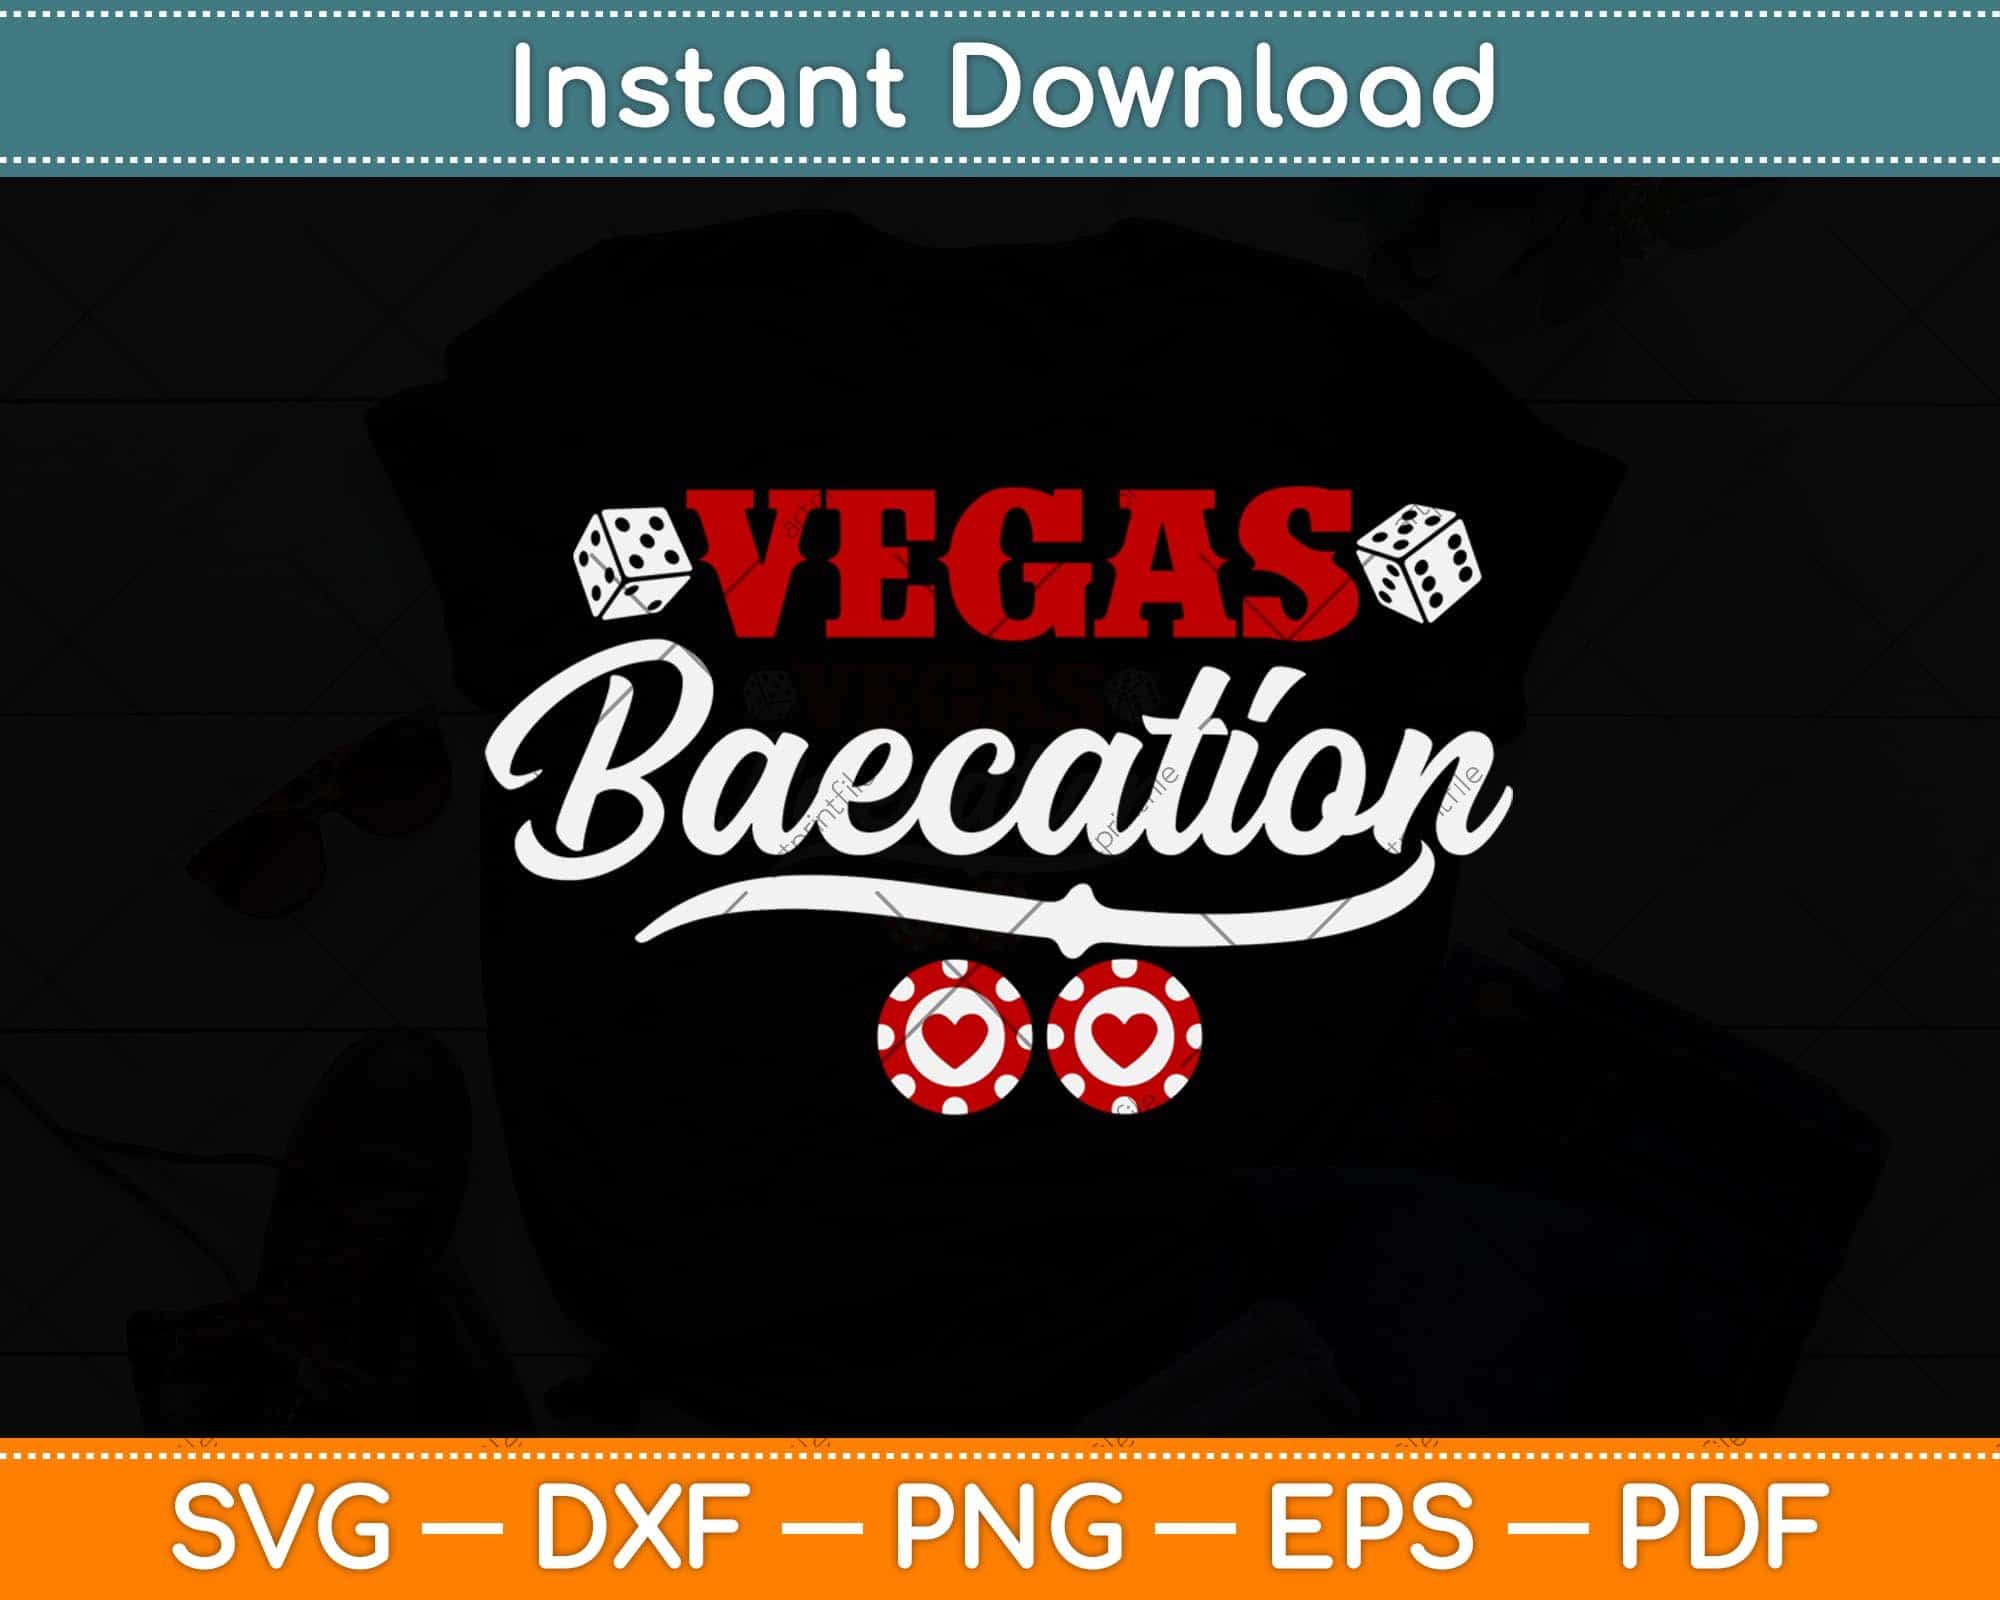 Las Vegas Sign Clipart / Cutting Files Svg Png Jpg Dxf 